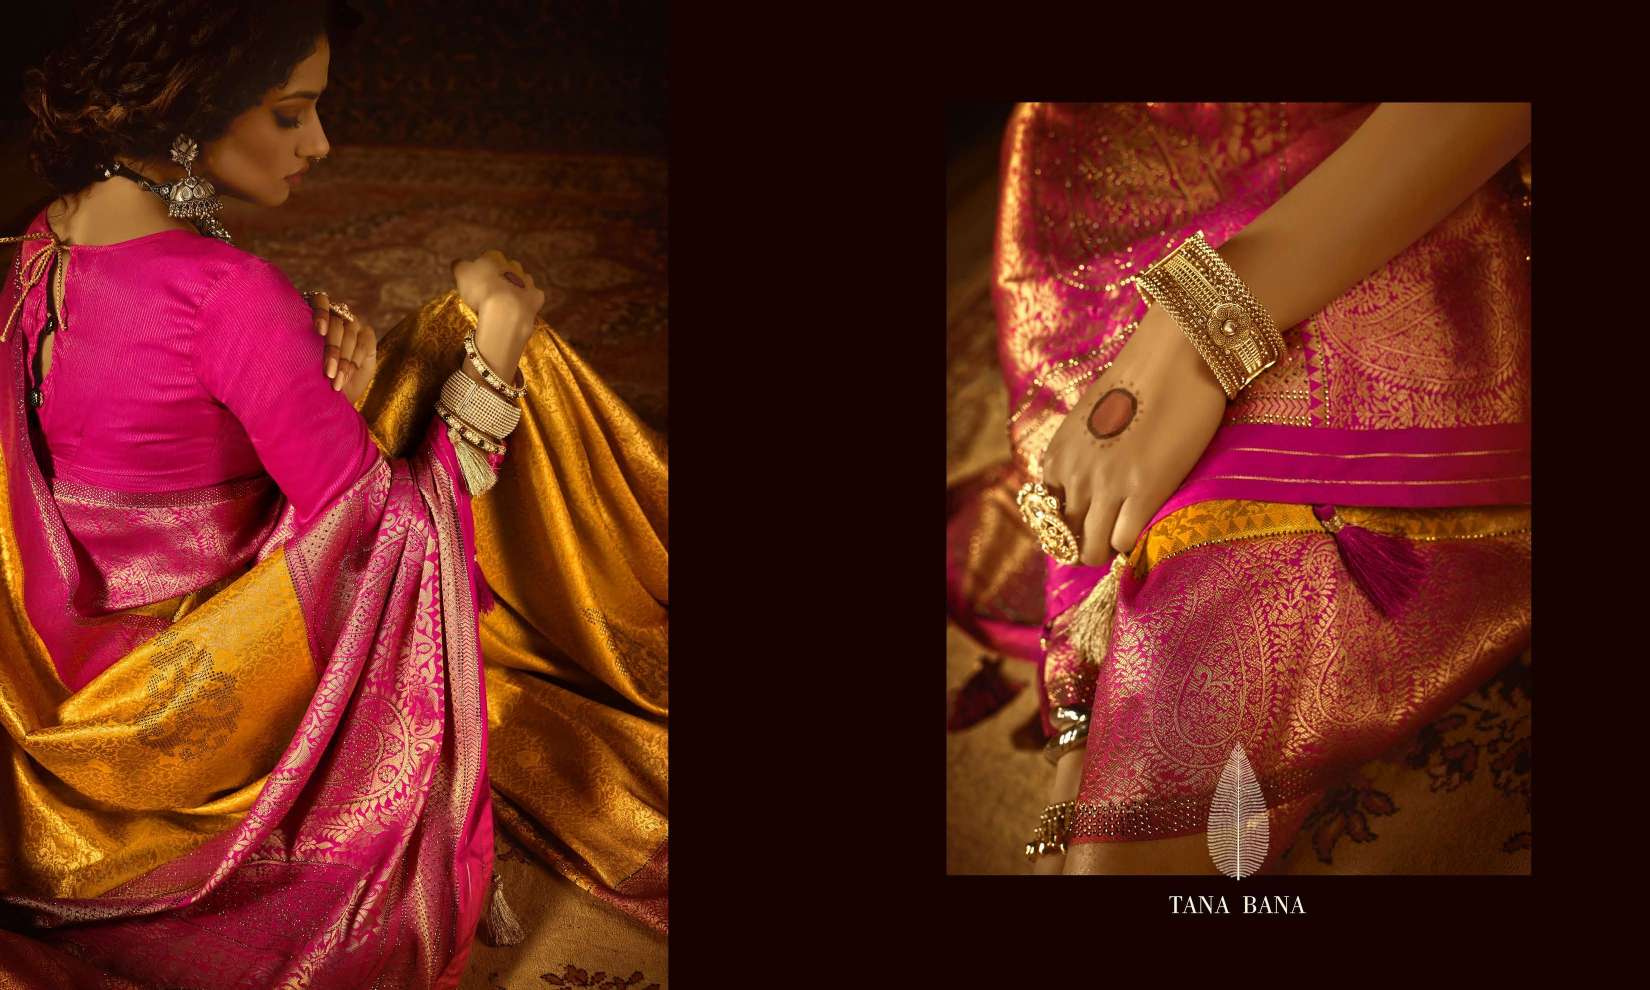 Tana Bana 309 Colours By Tana Bana 309-A To 309-H Series Indian Traditional Wear Collection Beautiful Stylish Fancy Colorful Party Wear & Occasional Wear Pure Silk Sarees At Wholesale Price